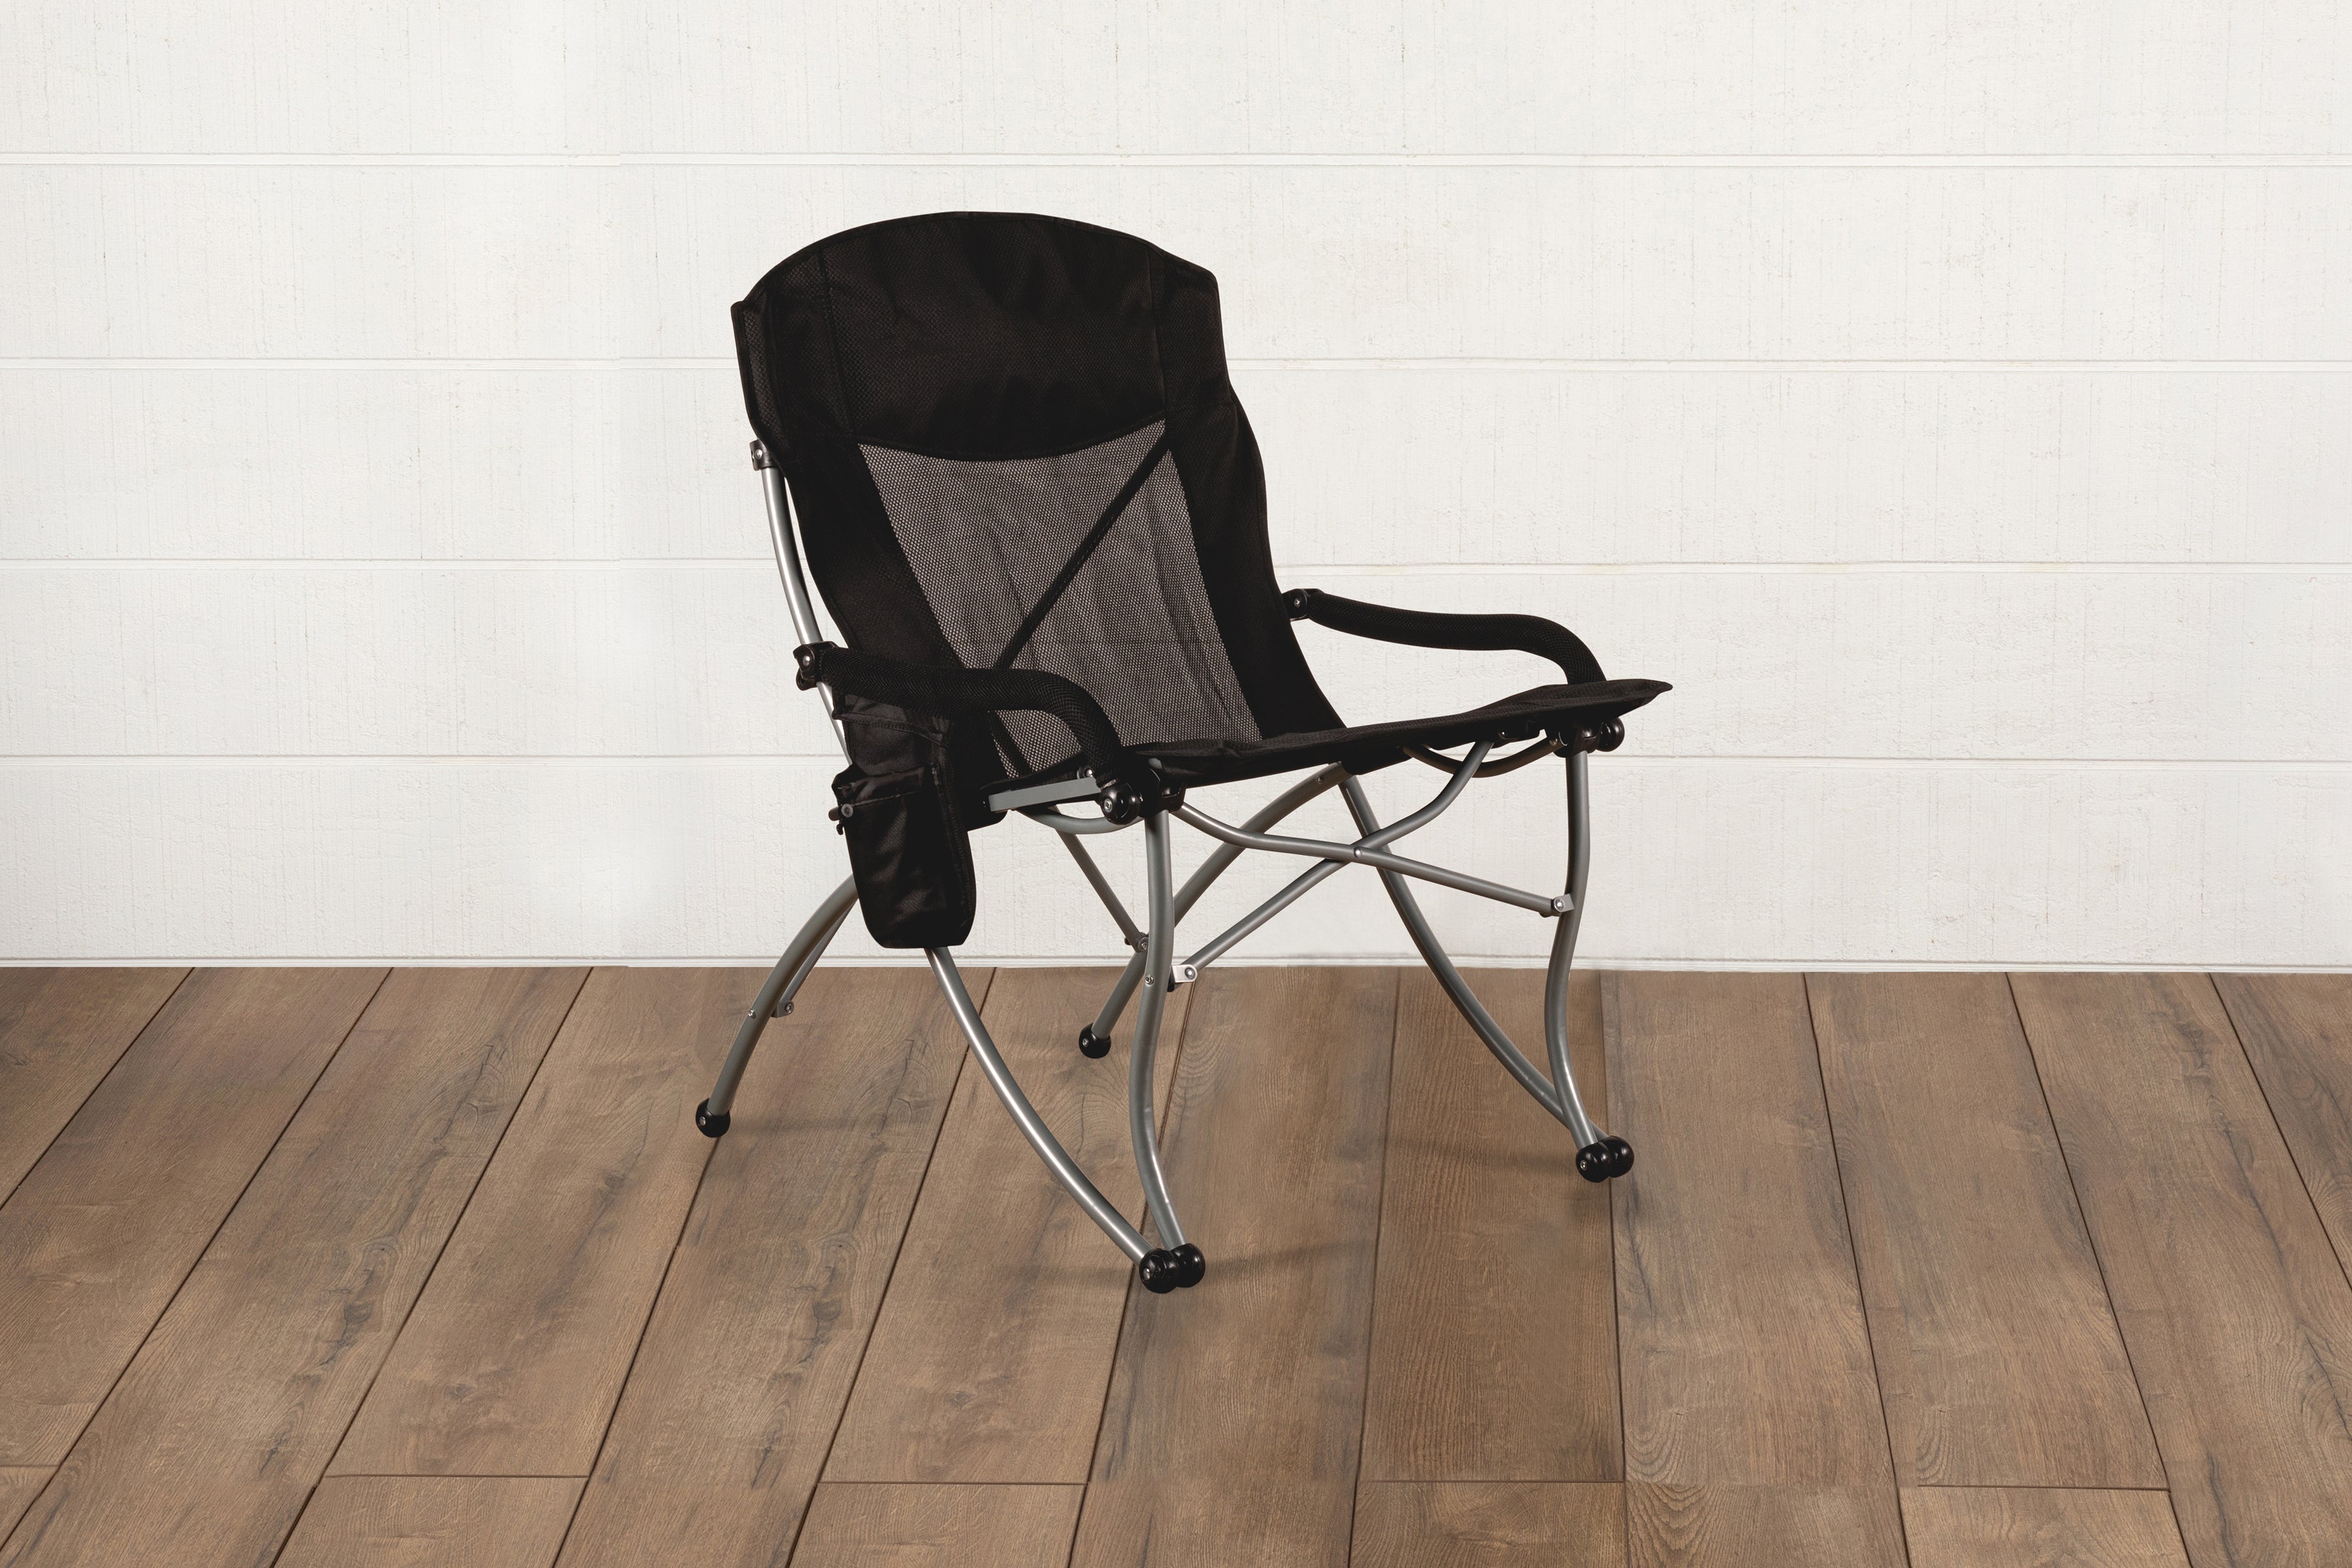 Los Angeles Chargers - PT-XL Heavy Duty Camping Chair